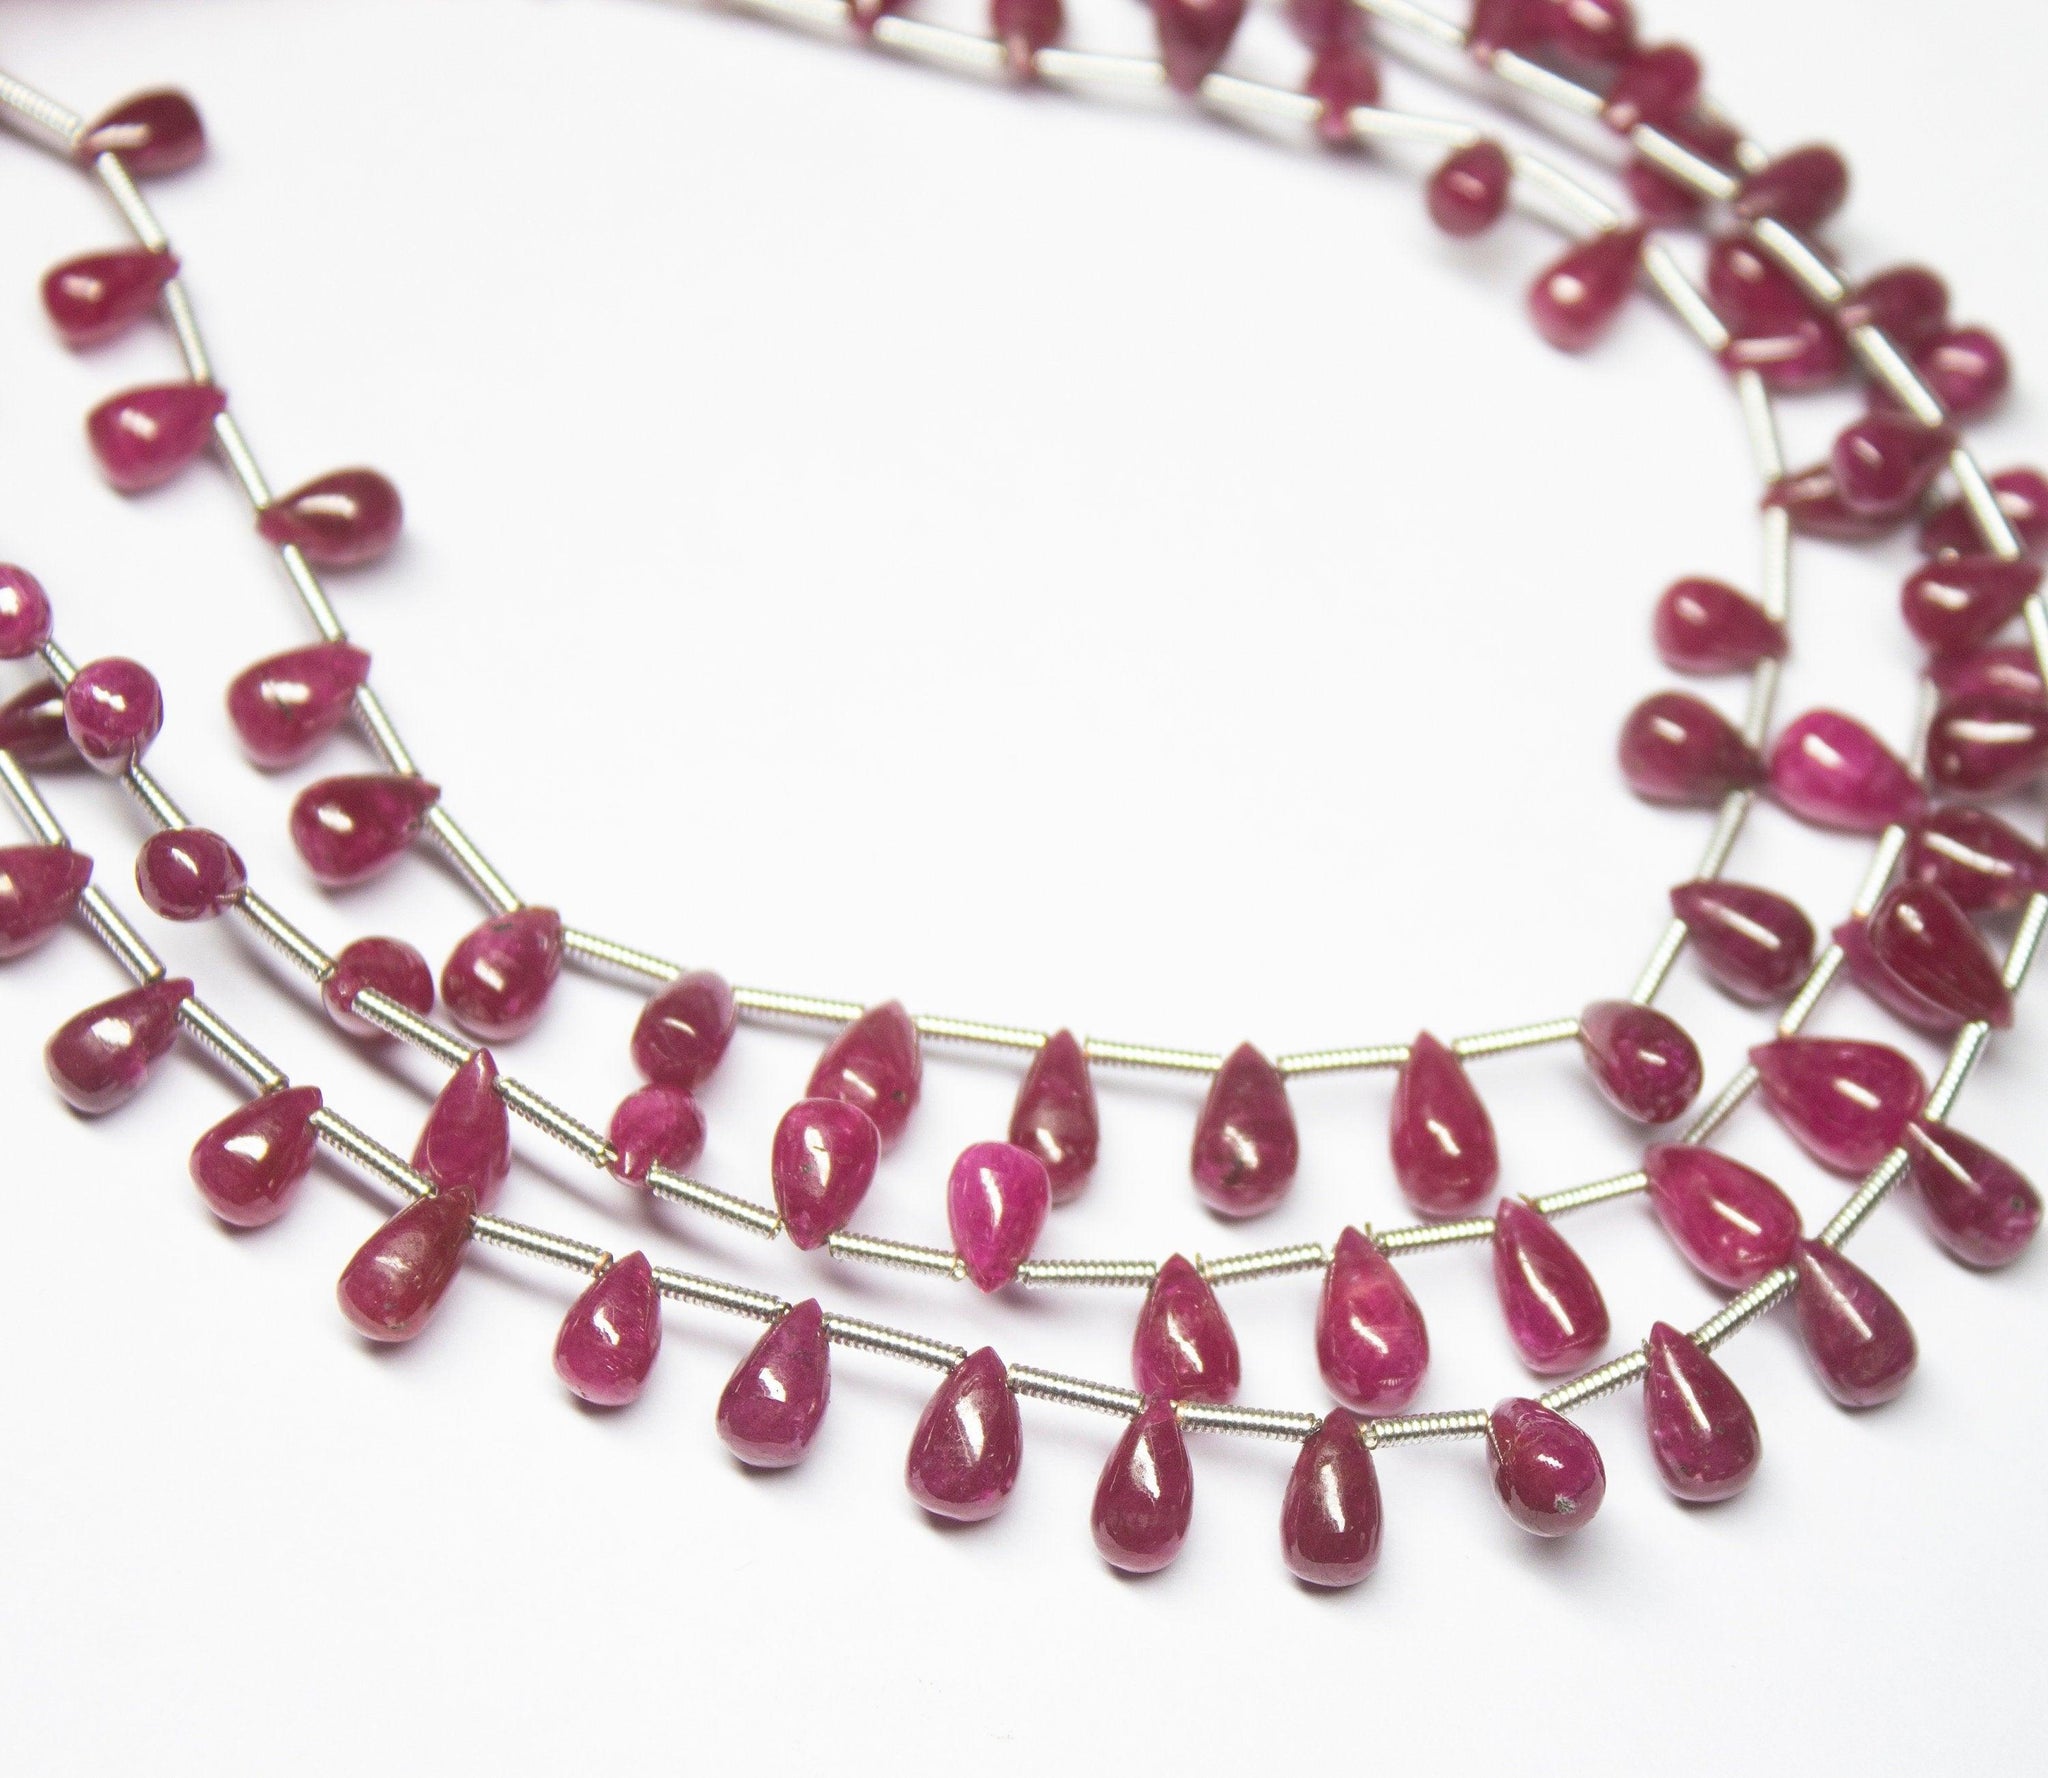 8-9MM Natural Real Ruby Sapphire Smooth Loose Round Beads For